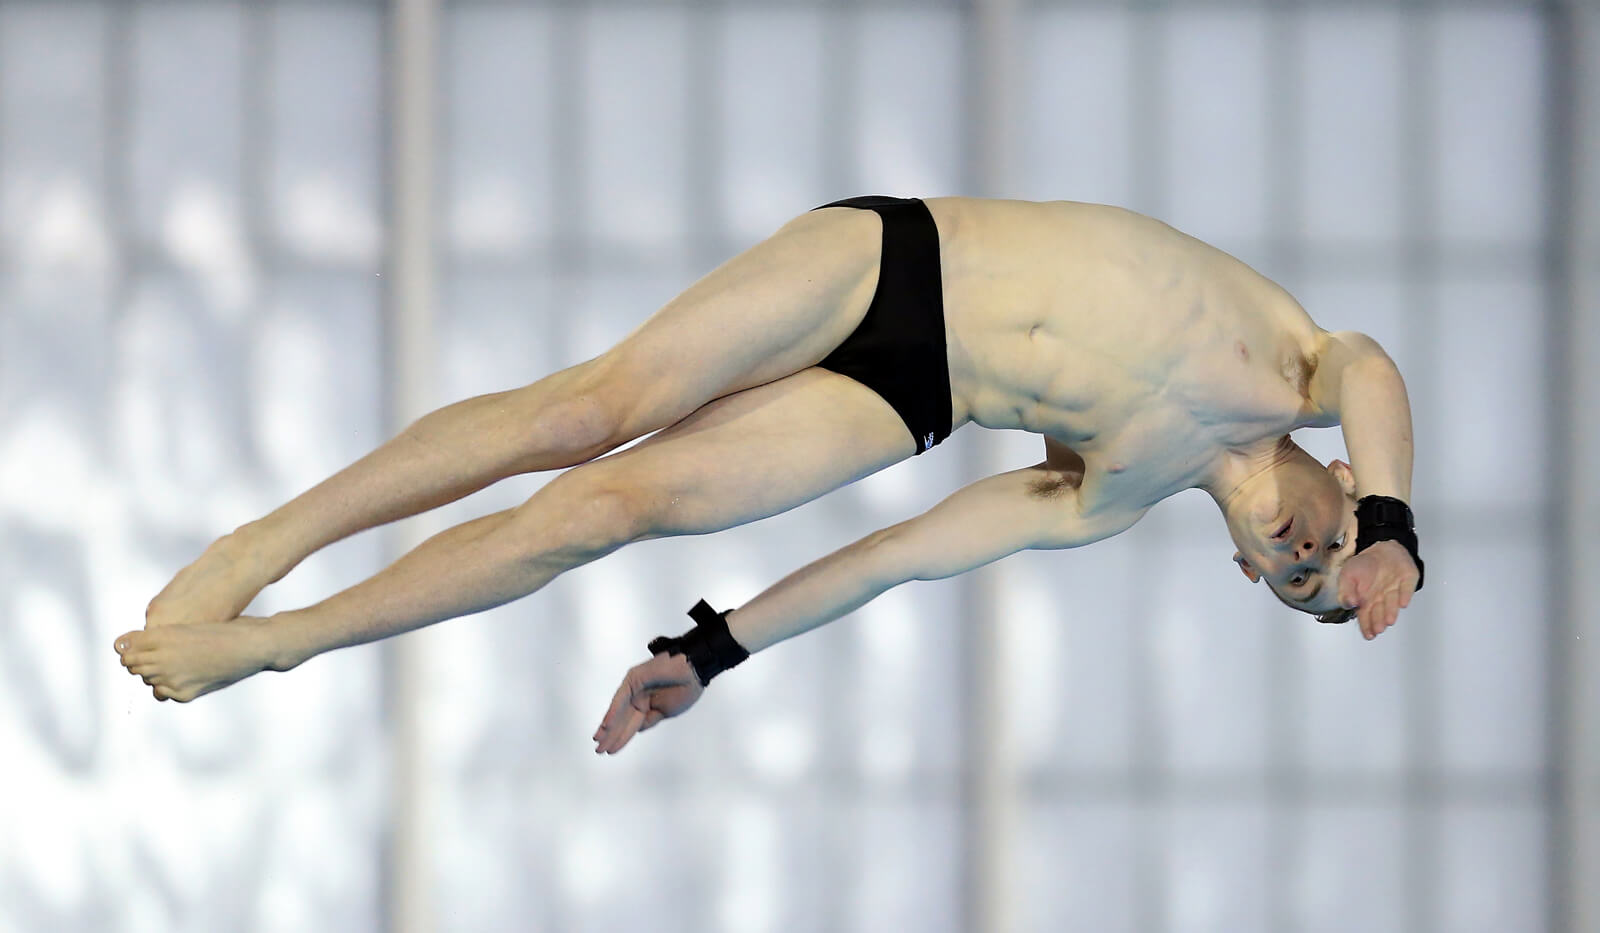 Bryden Hattie takes ninth spot in diving at Youth Olympic Games